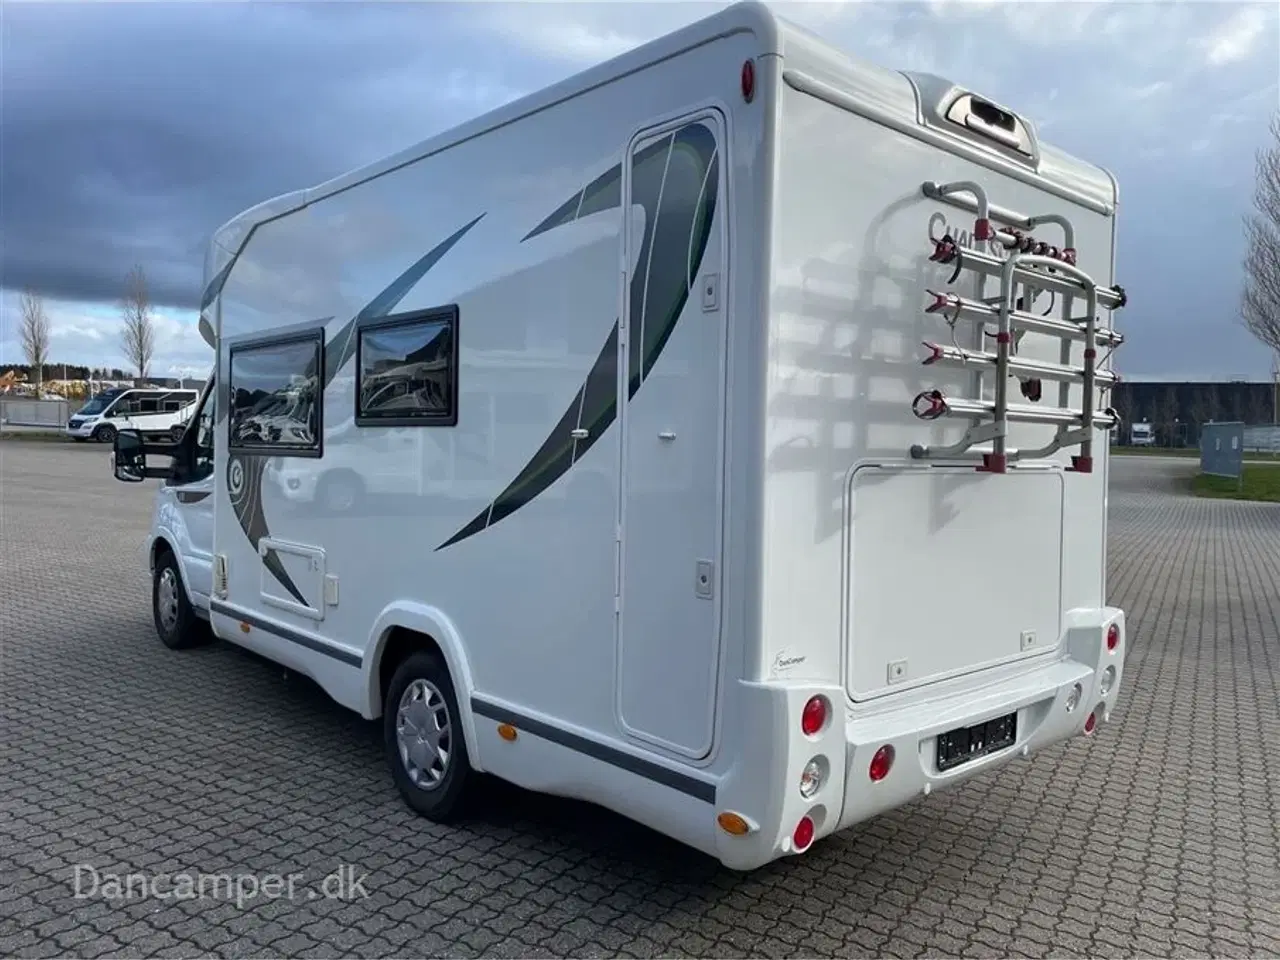 Billede 2 - 2018 - Chausson 610 Special Edition   2018 model Special Edition